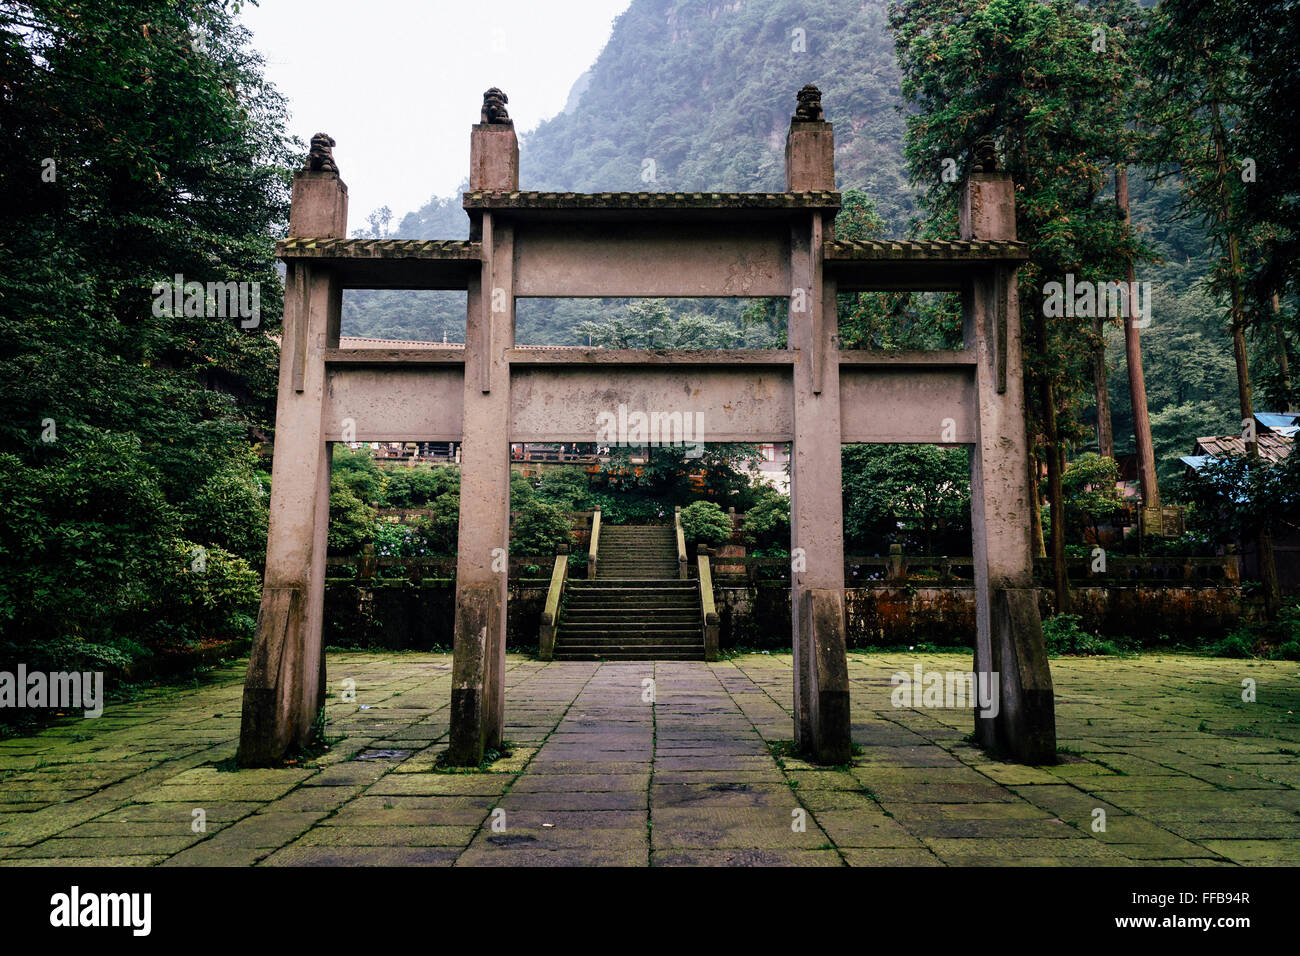 The view of a stone gateway in Emei mountain. Stock Photo